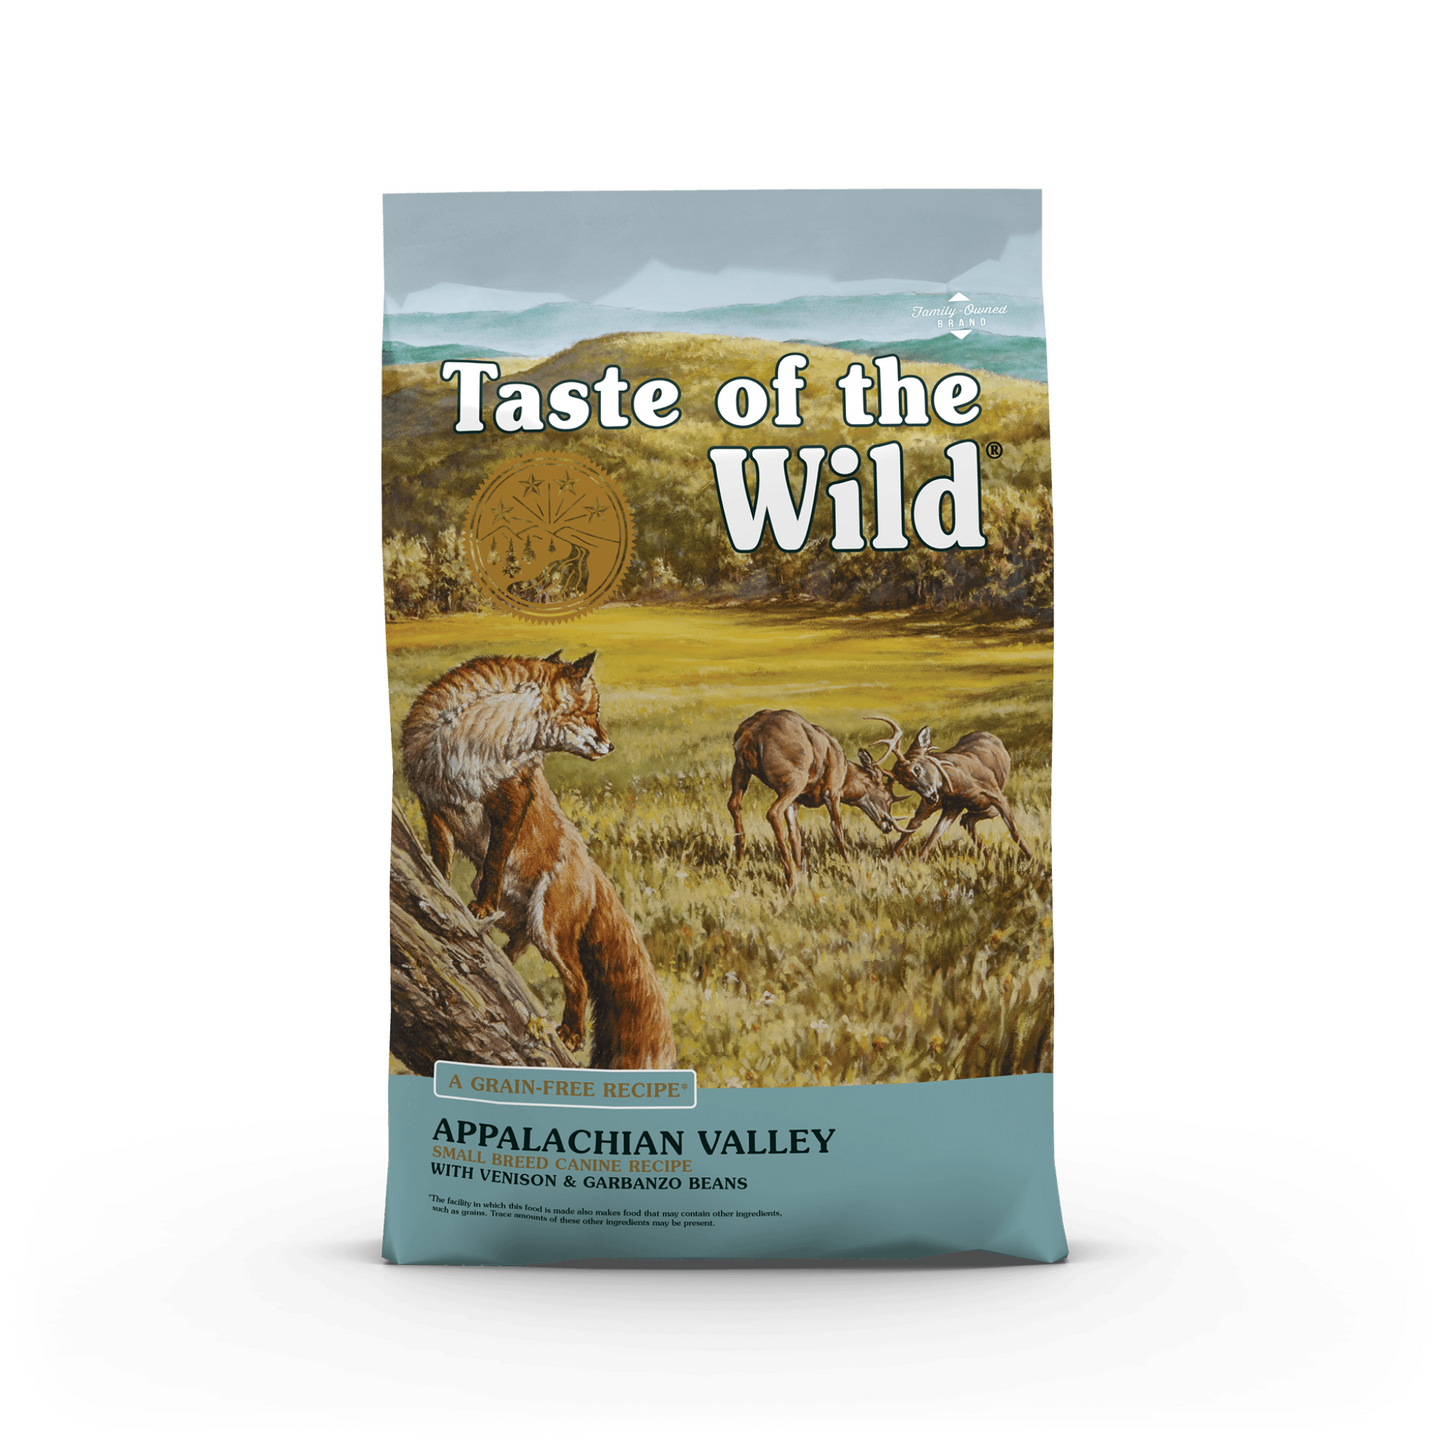 Taste of the Wild Appalachian Valley Small Breed with Venison & Garbanzo Beans